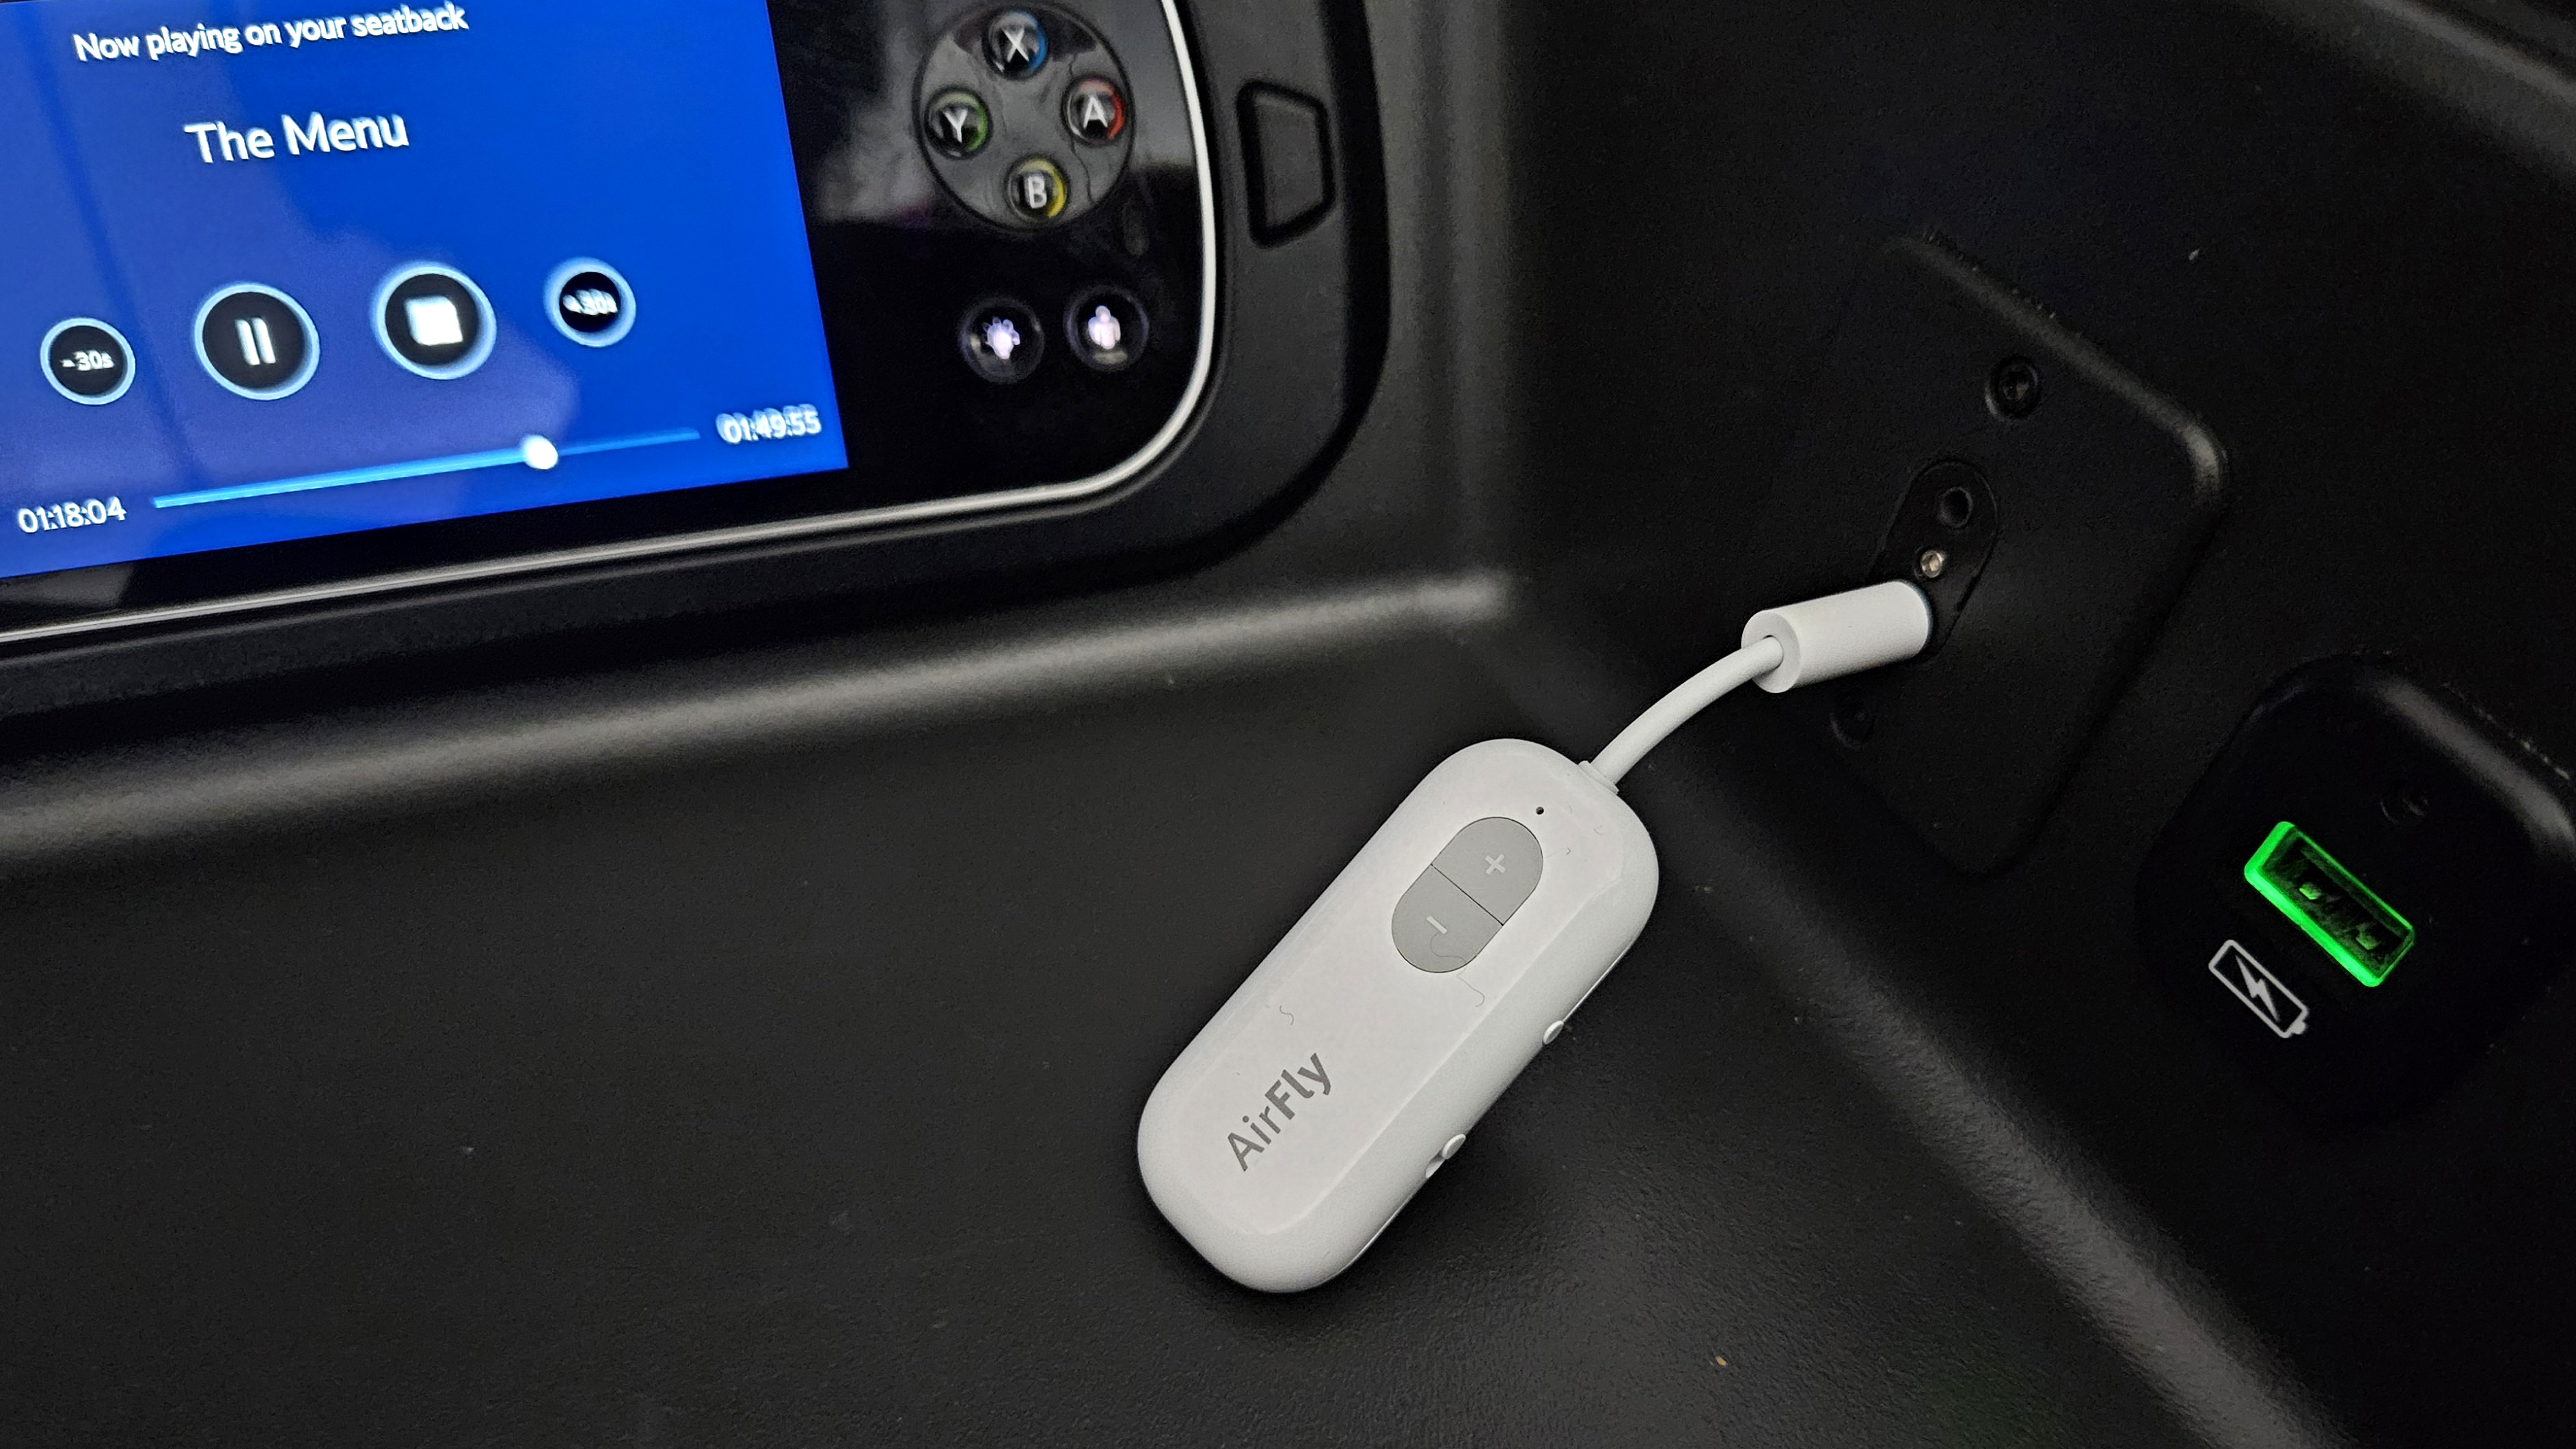 Bluetooth Transmitter/Receiver 3.5mm Jack Duo Airfly Pro